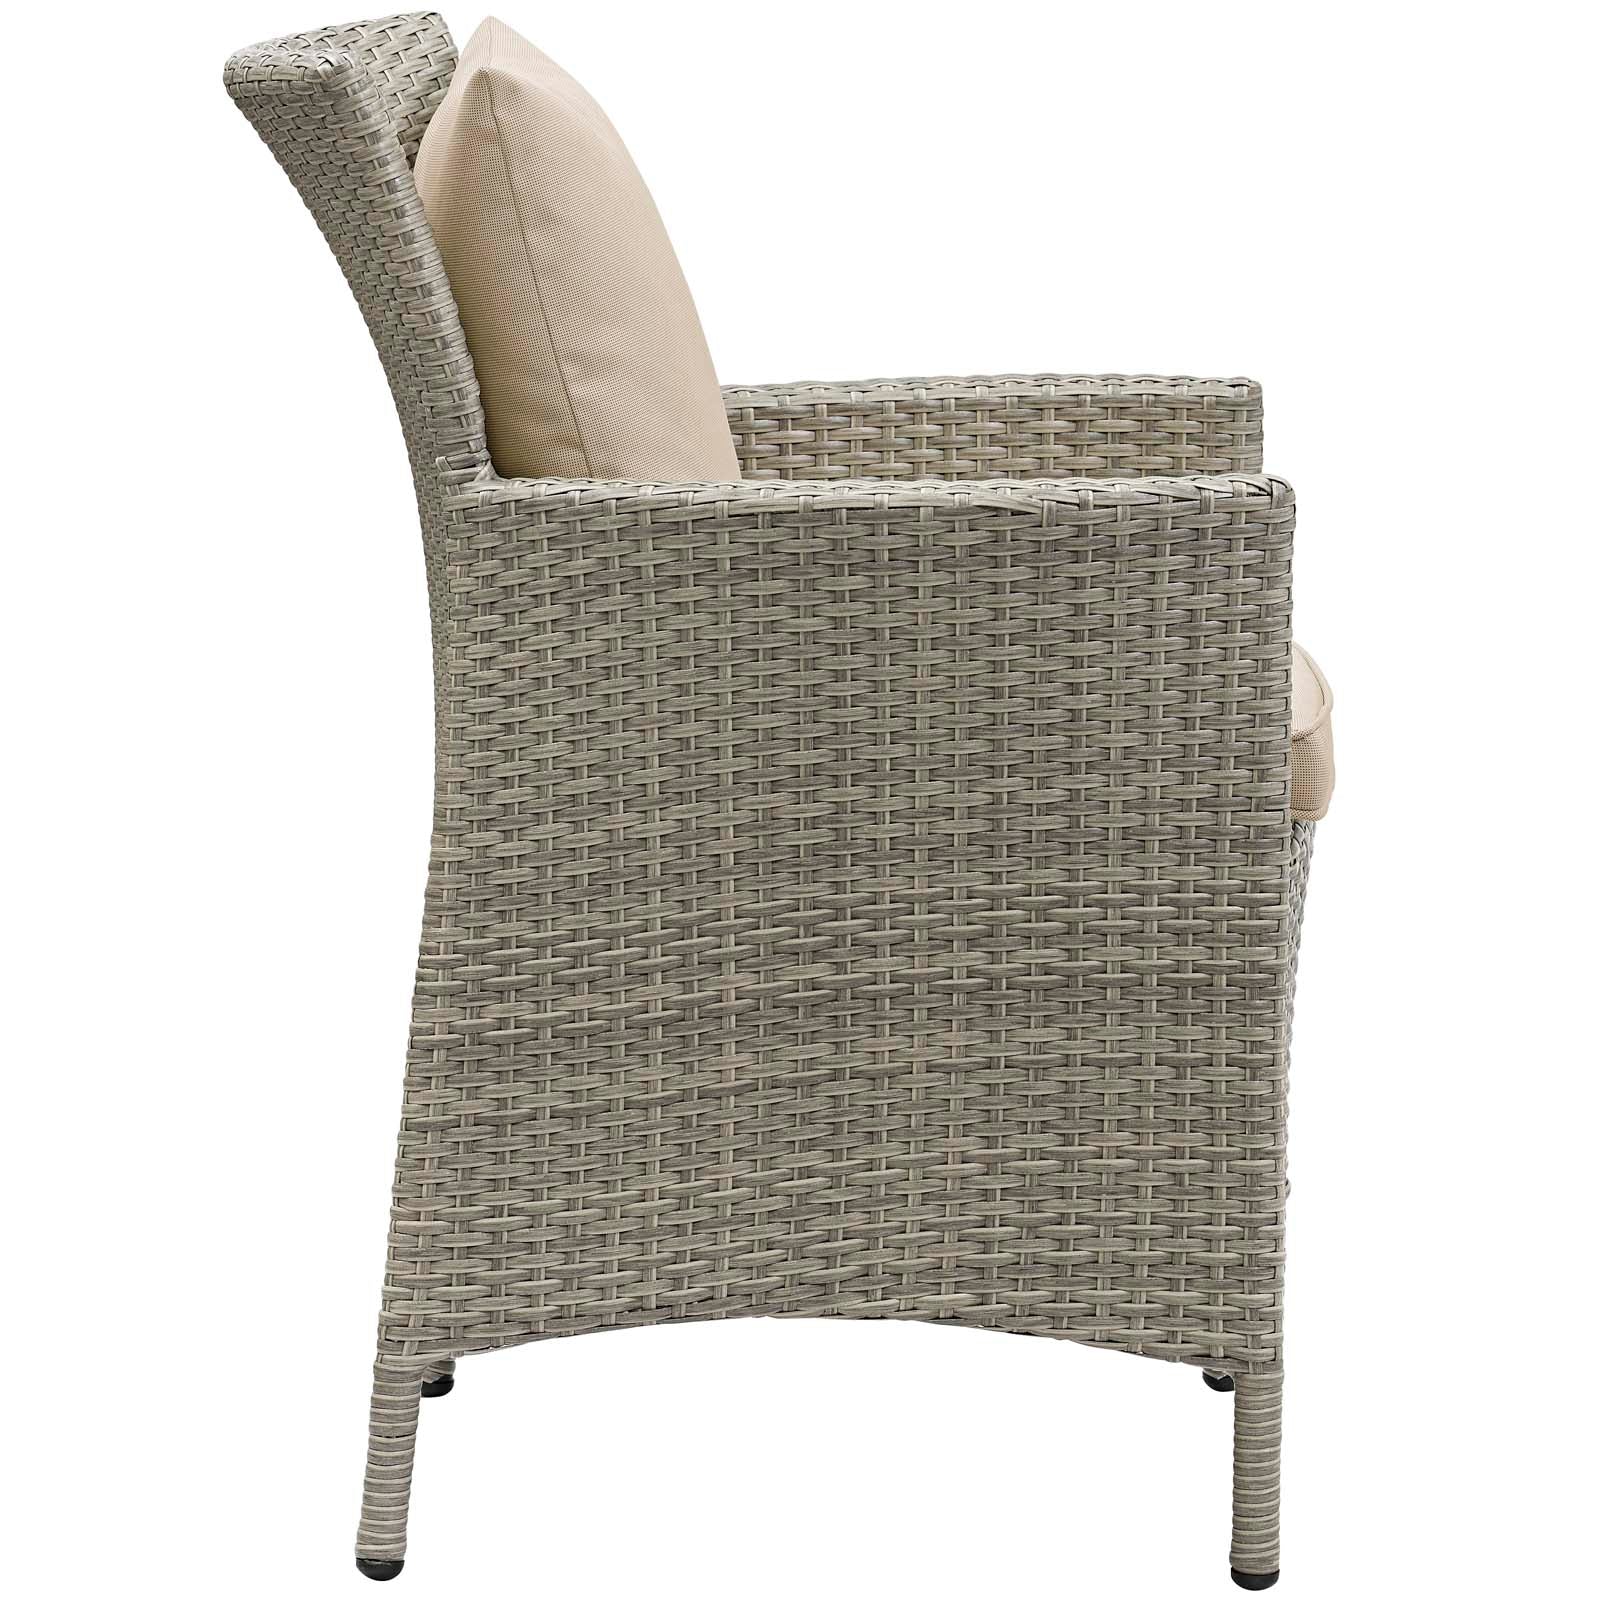 Modway Outdoor Dining Chairs - Conduit Outdoor Patio Wicker Rattan Dining Armchair Light Gray Beige